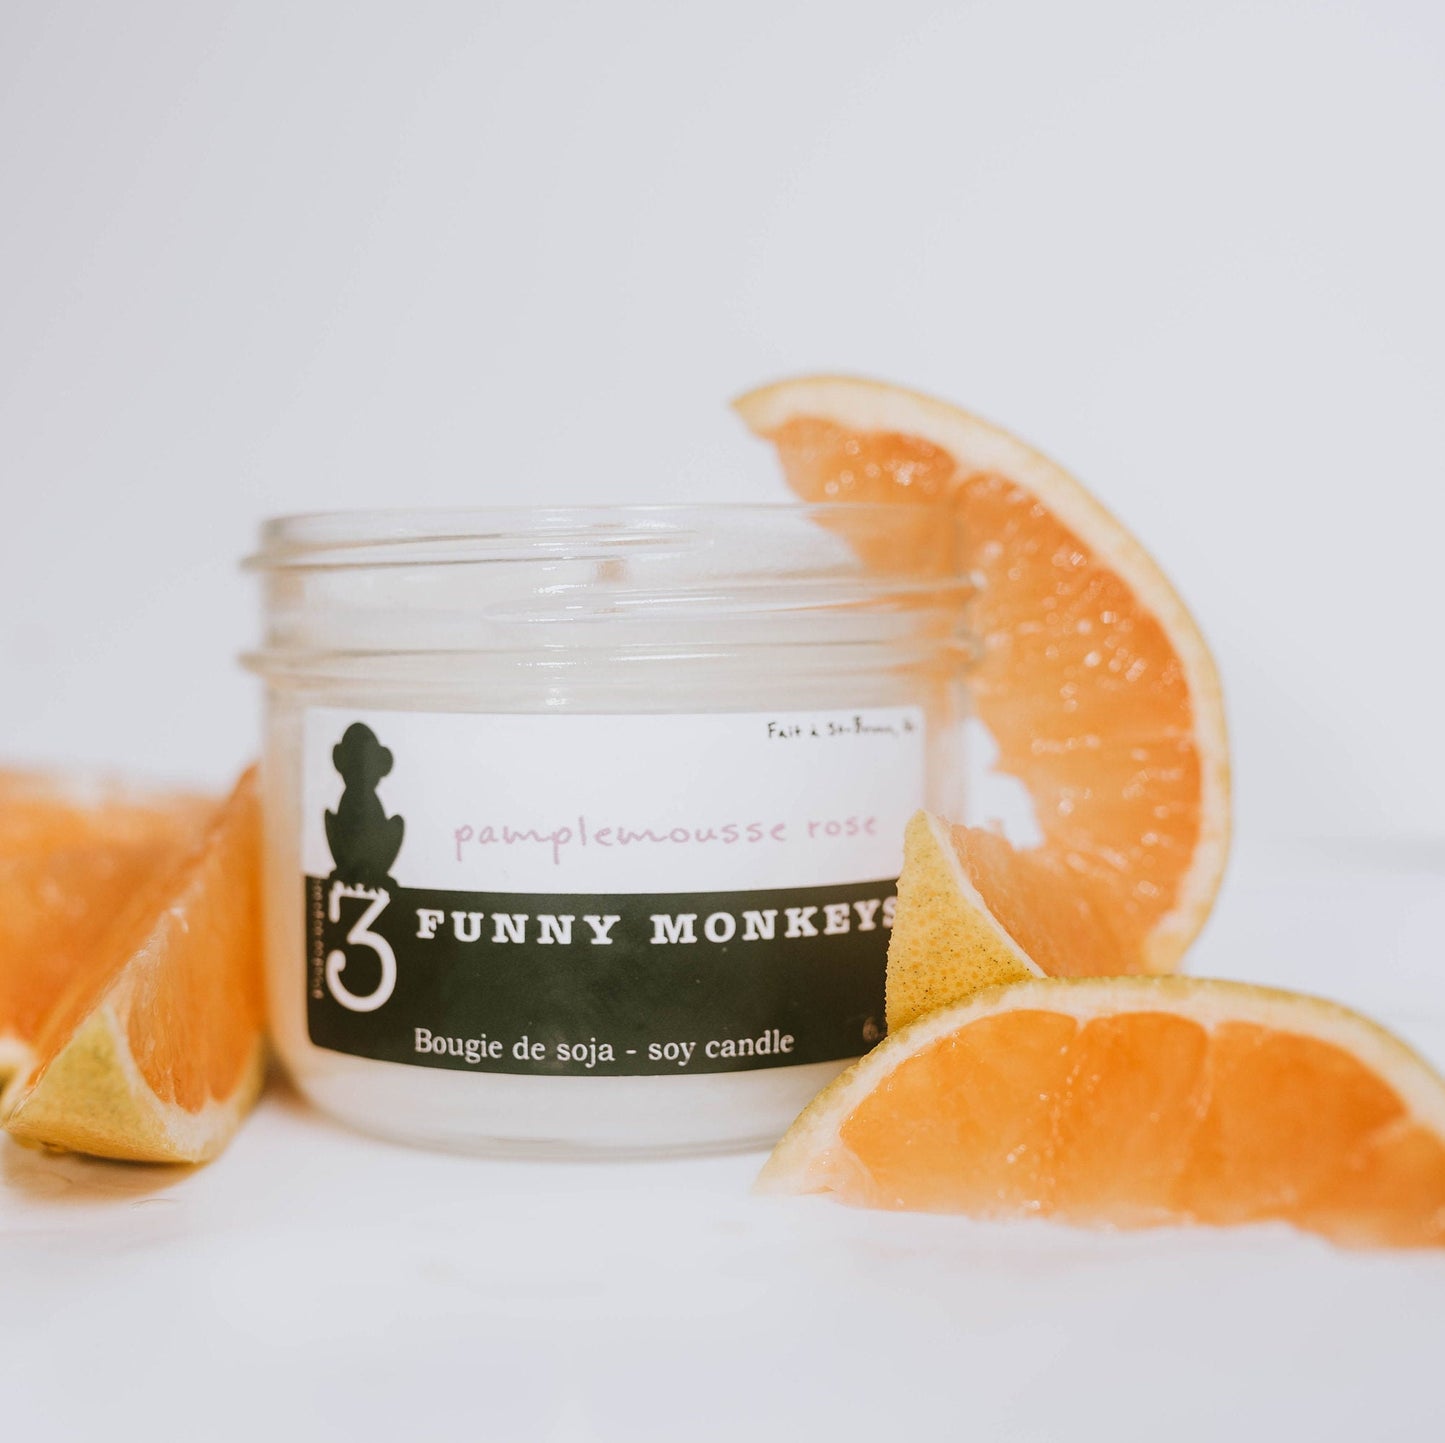 Pink grapefruit, soy candle